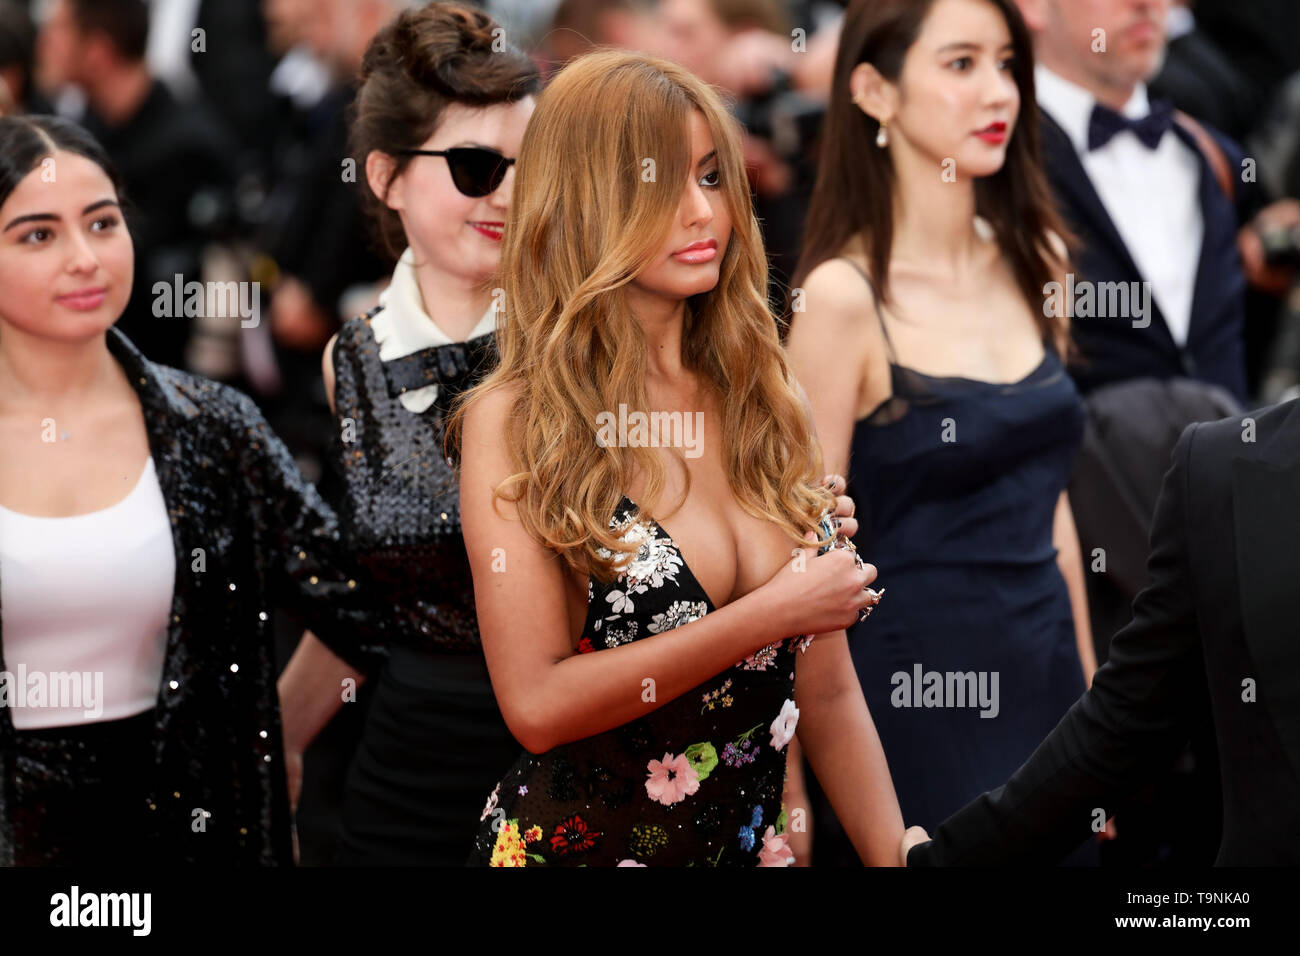 Cannes. 19th May, 2019. Zahia Dehar arrives to the premiere of ' A HIDDEN LIFE ' during the 2019 Cannes Film Festival on May 19, 2019 at Palais des Festivals in Cannes, France. ( Credit: Lyvans Boolaky/Image Space/Media Punch)/Alamy Live News Stock Photo